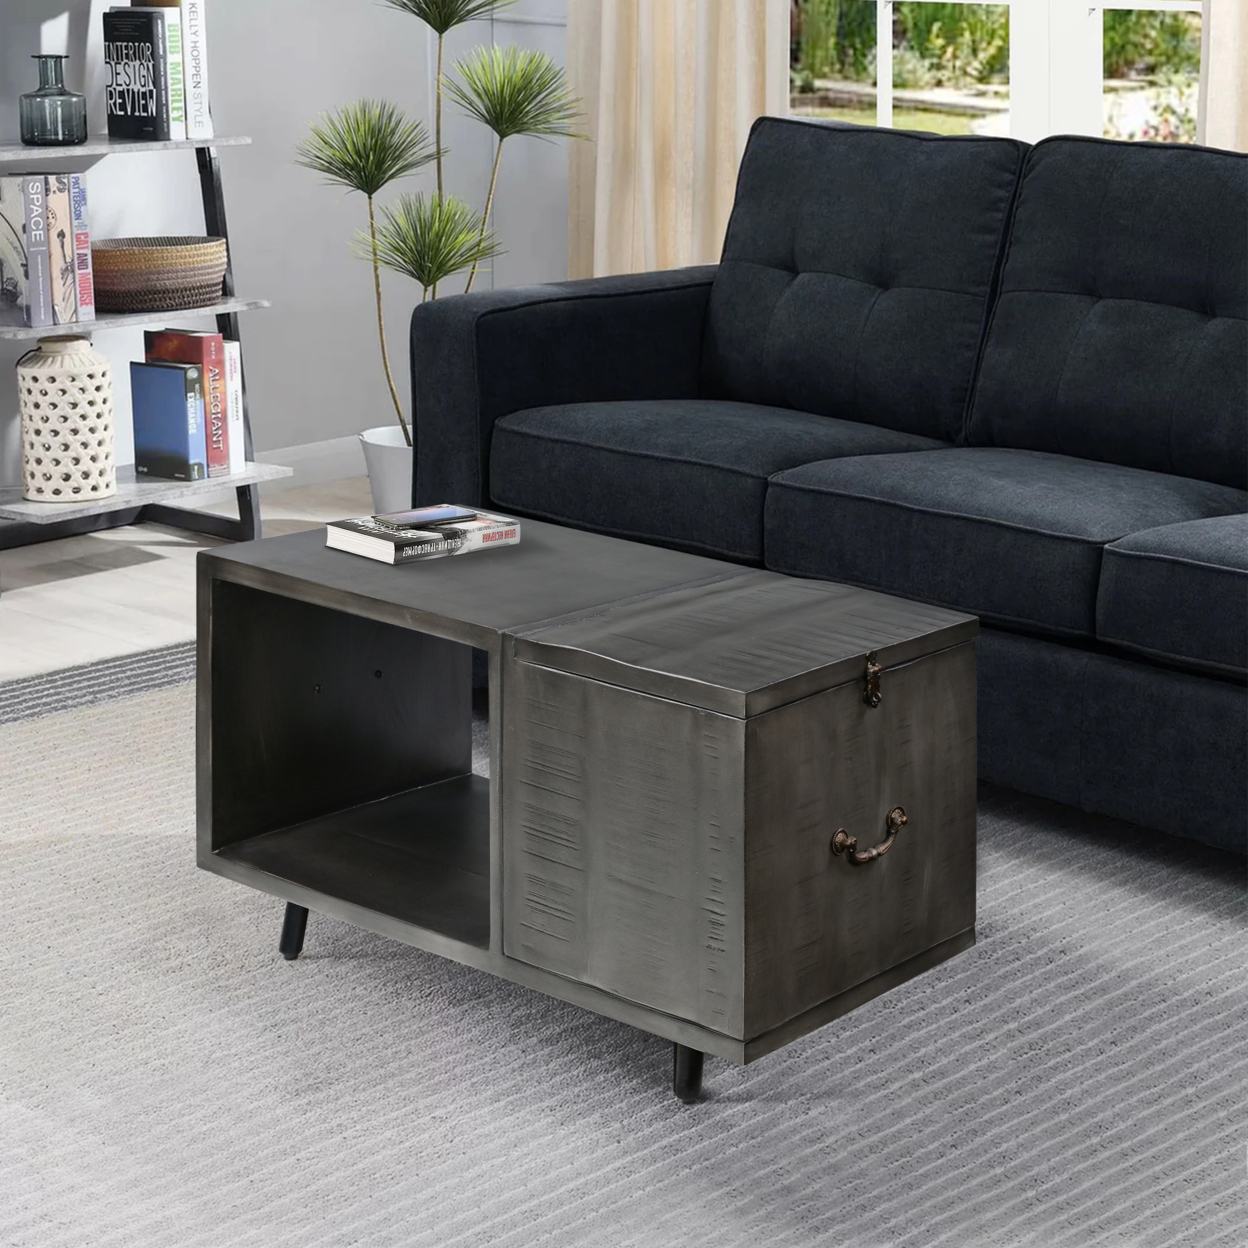 30 Inch Handcrafted Coffee Table With Hinged Lift Top Storage, Open Shelf, And Metal Legs, Charcoal Gray- Saltoro Sherpi